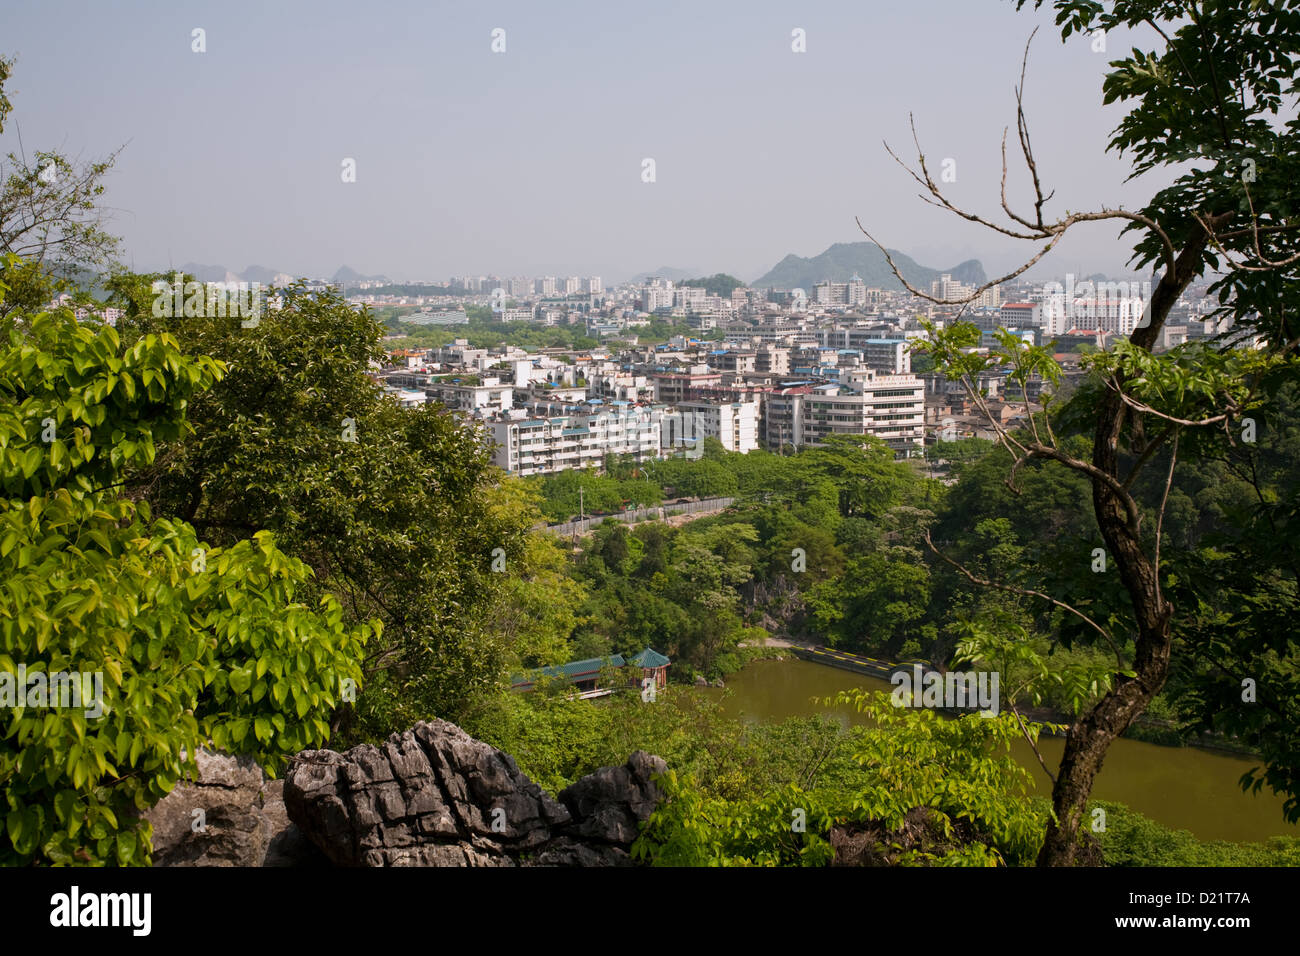 Guilin city in Guangxi Province in Southern China, seen from the side of the mountain in Xishan Park. Stock Photo